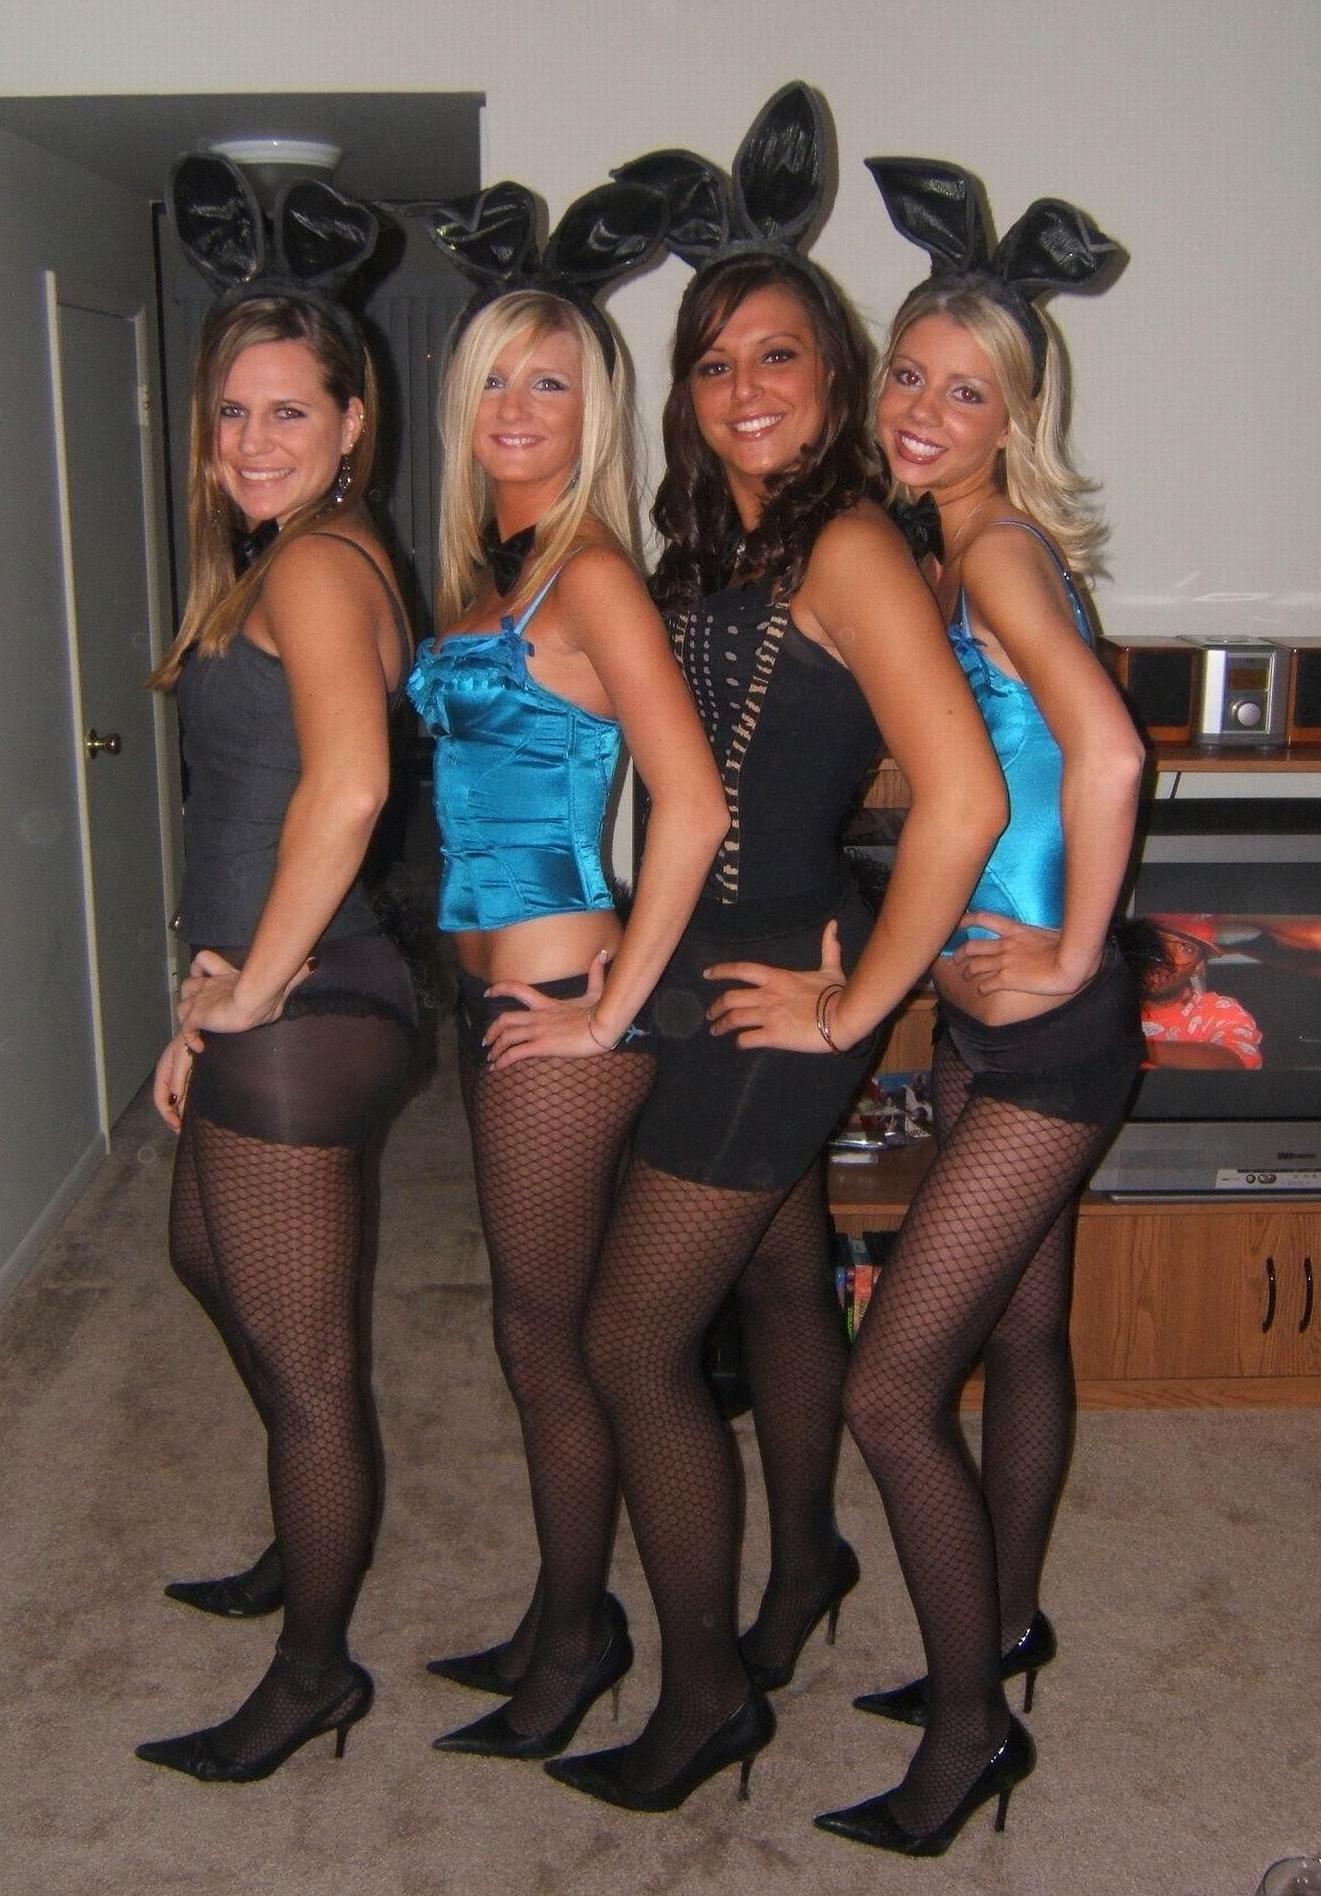 Four Bunny Girls wearing Black Fishnet and Nylon Tights, Stilettos and Bustiers